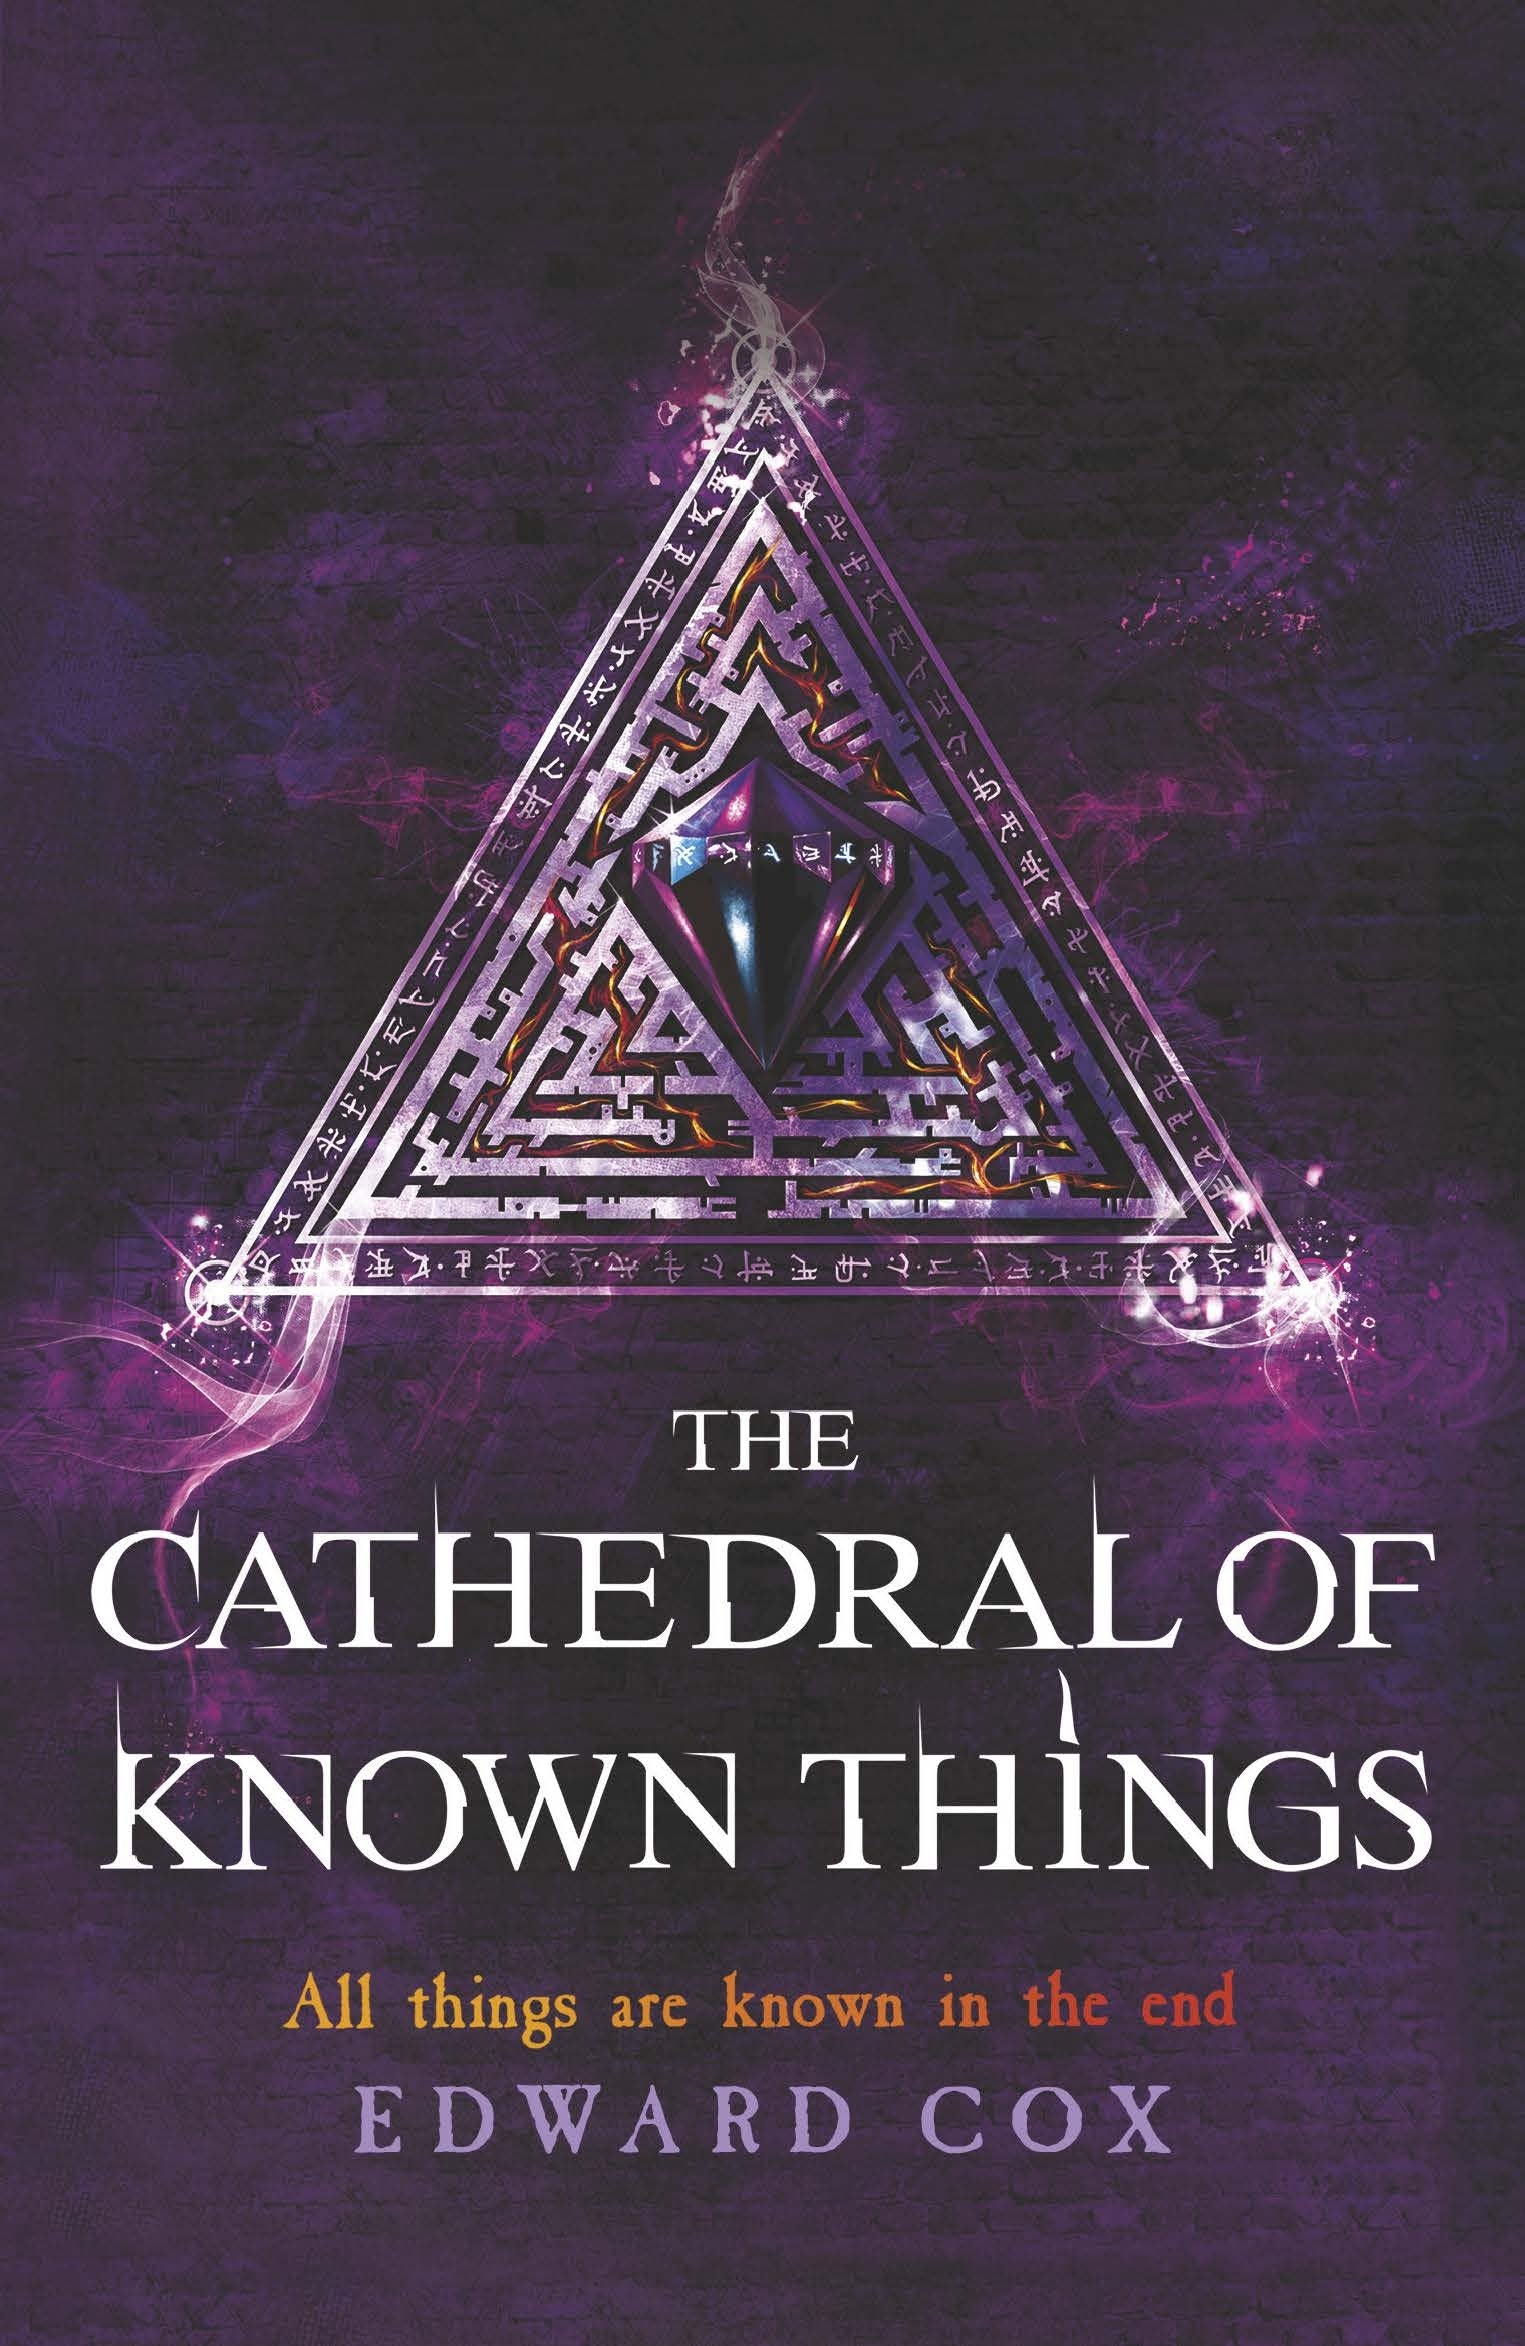 The Cathedral of Known Things by Edward Cox